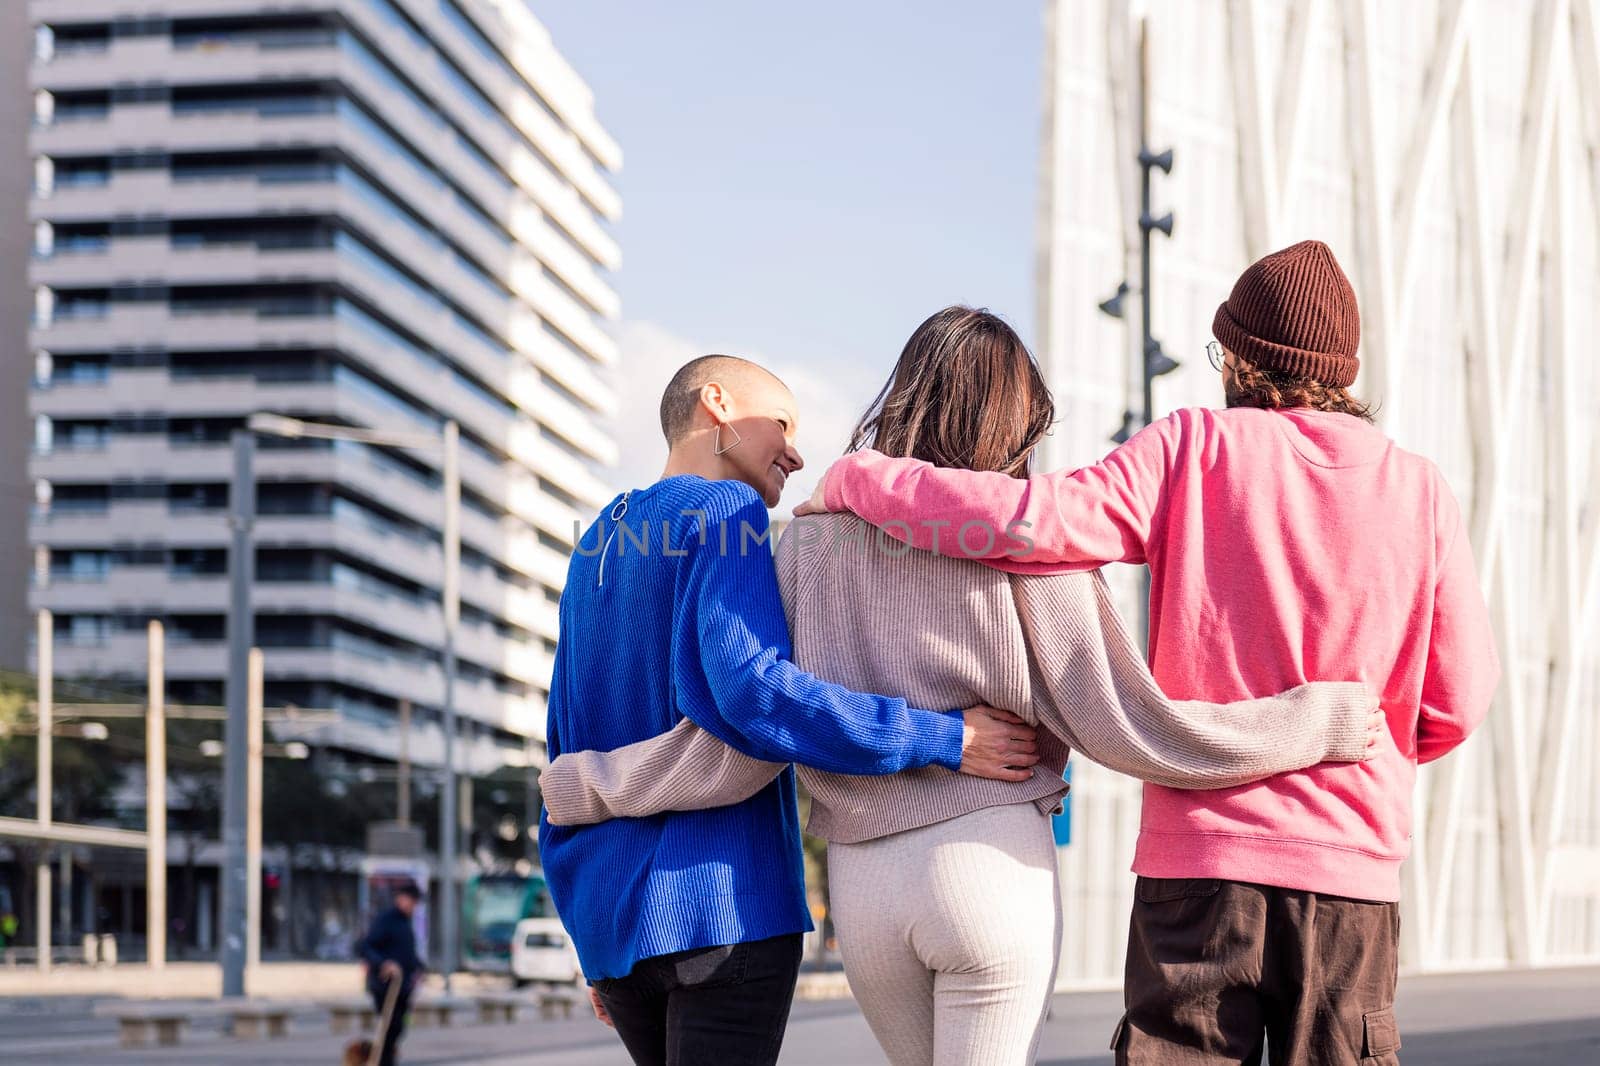 rear view of three friends, one man and two women, taking a peaceful stroll together on a sunny day, concept of friendship and urban lifestyle